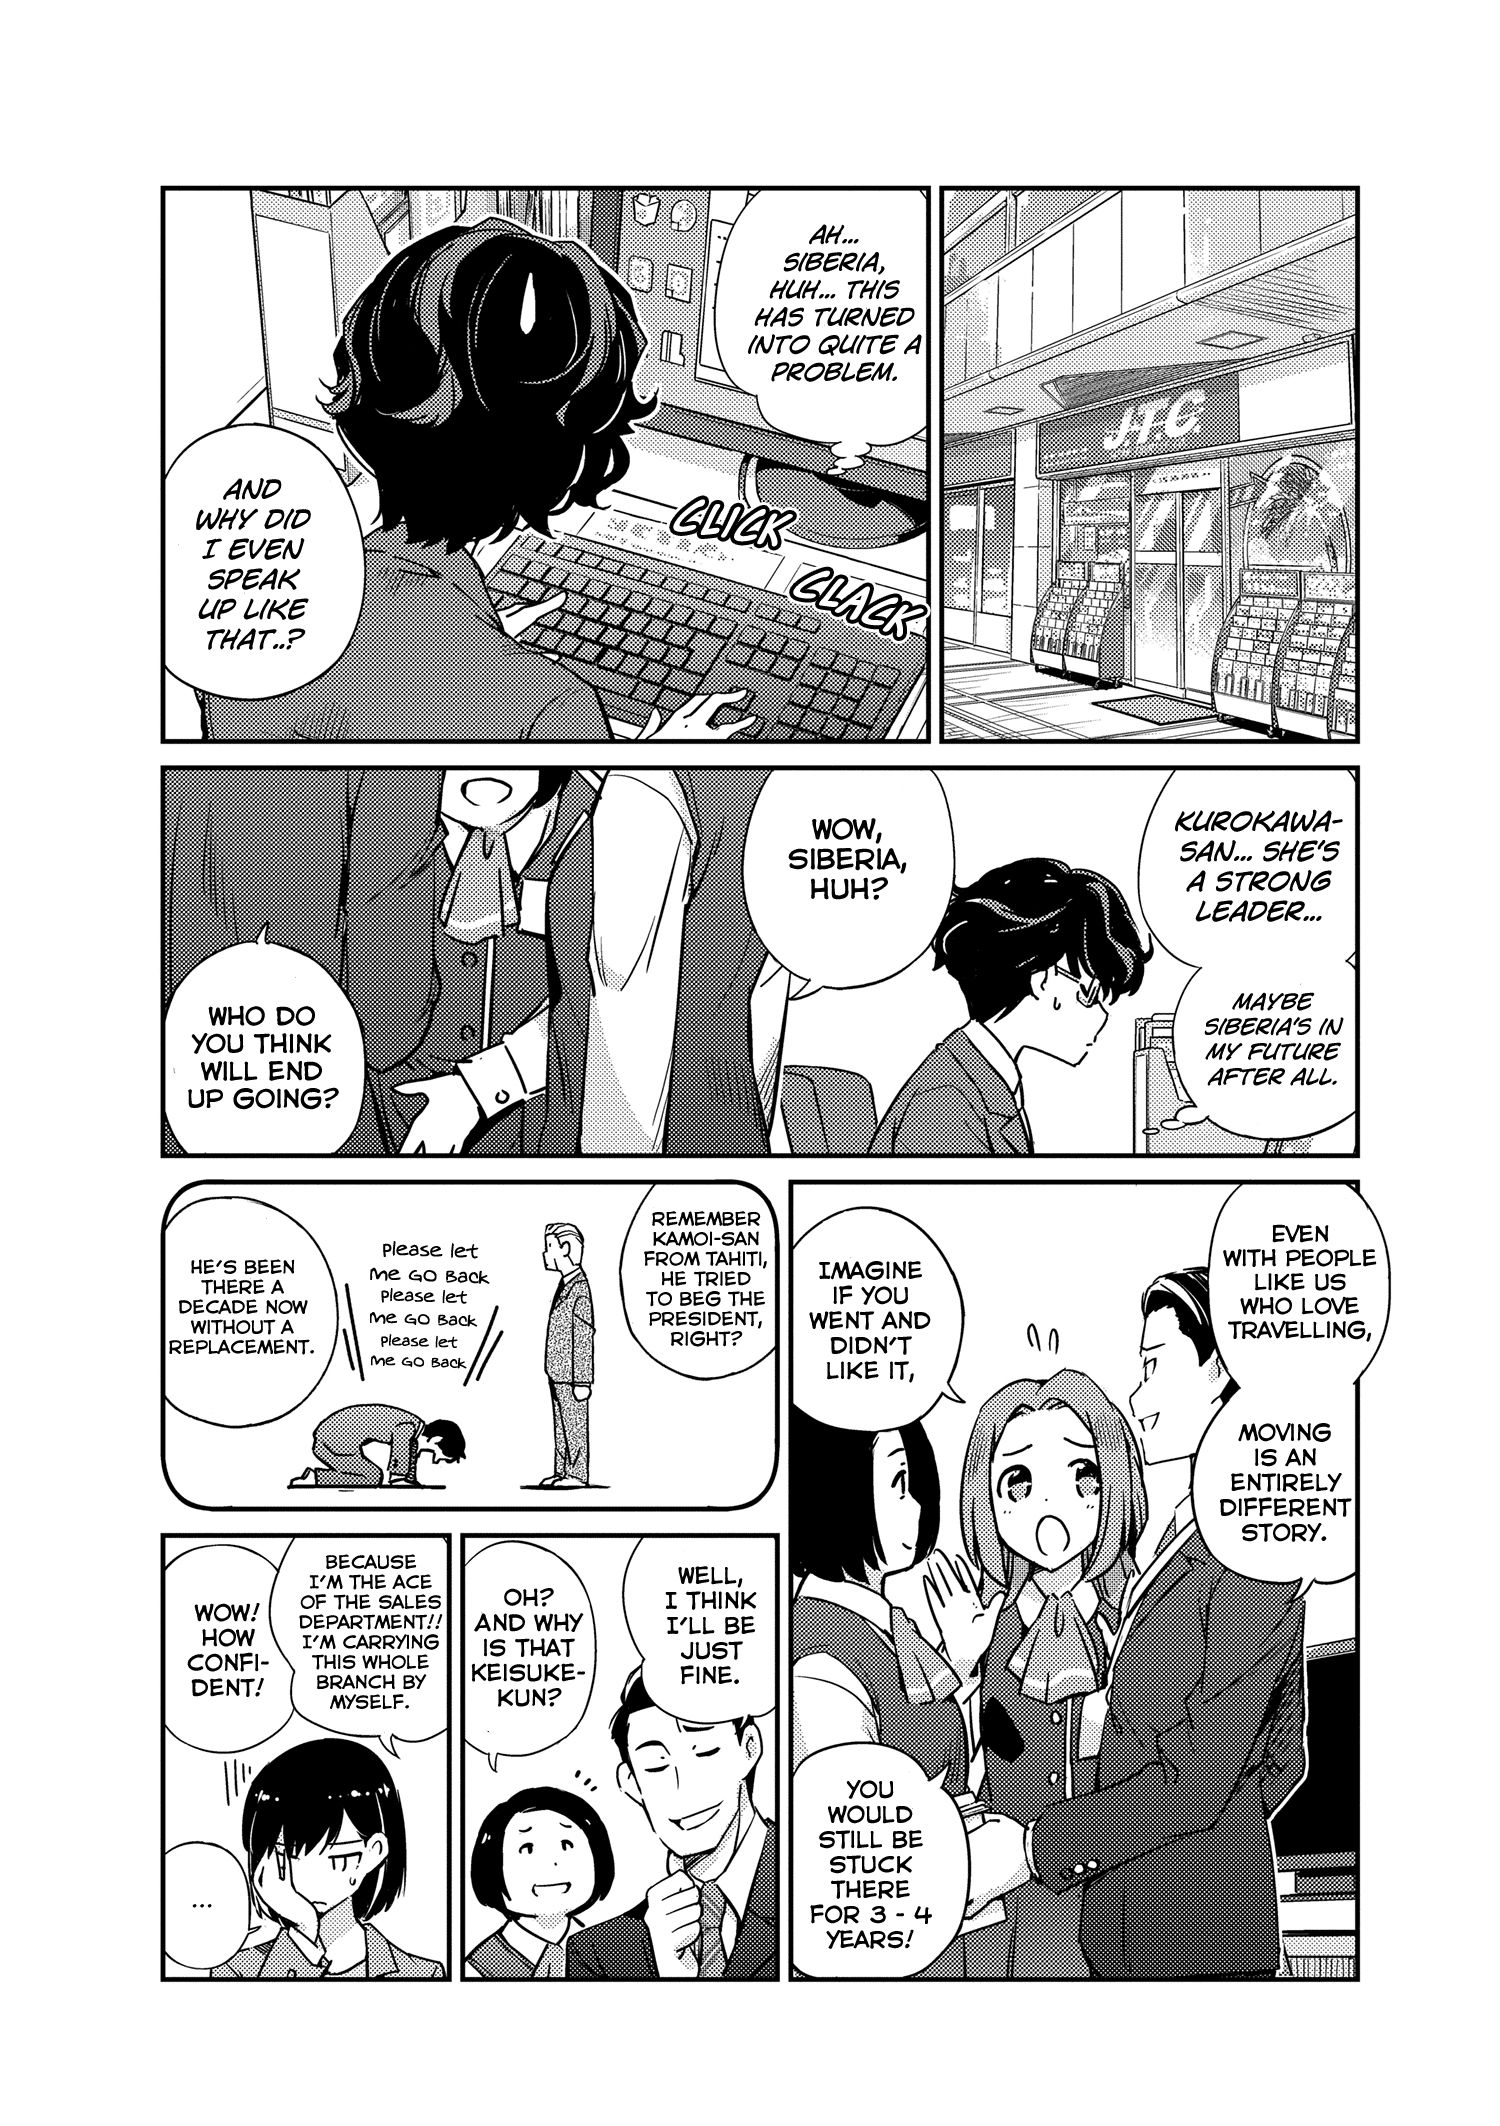 Are You Really Getting Married? - 1 page 25